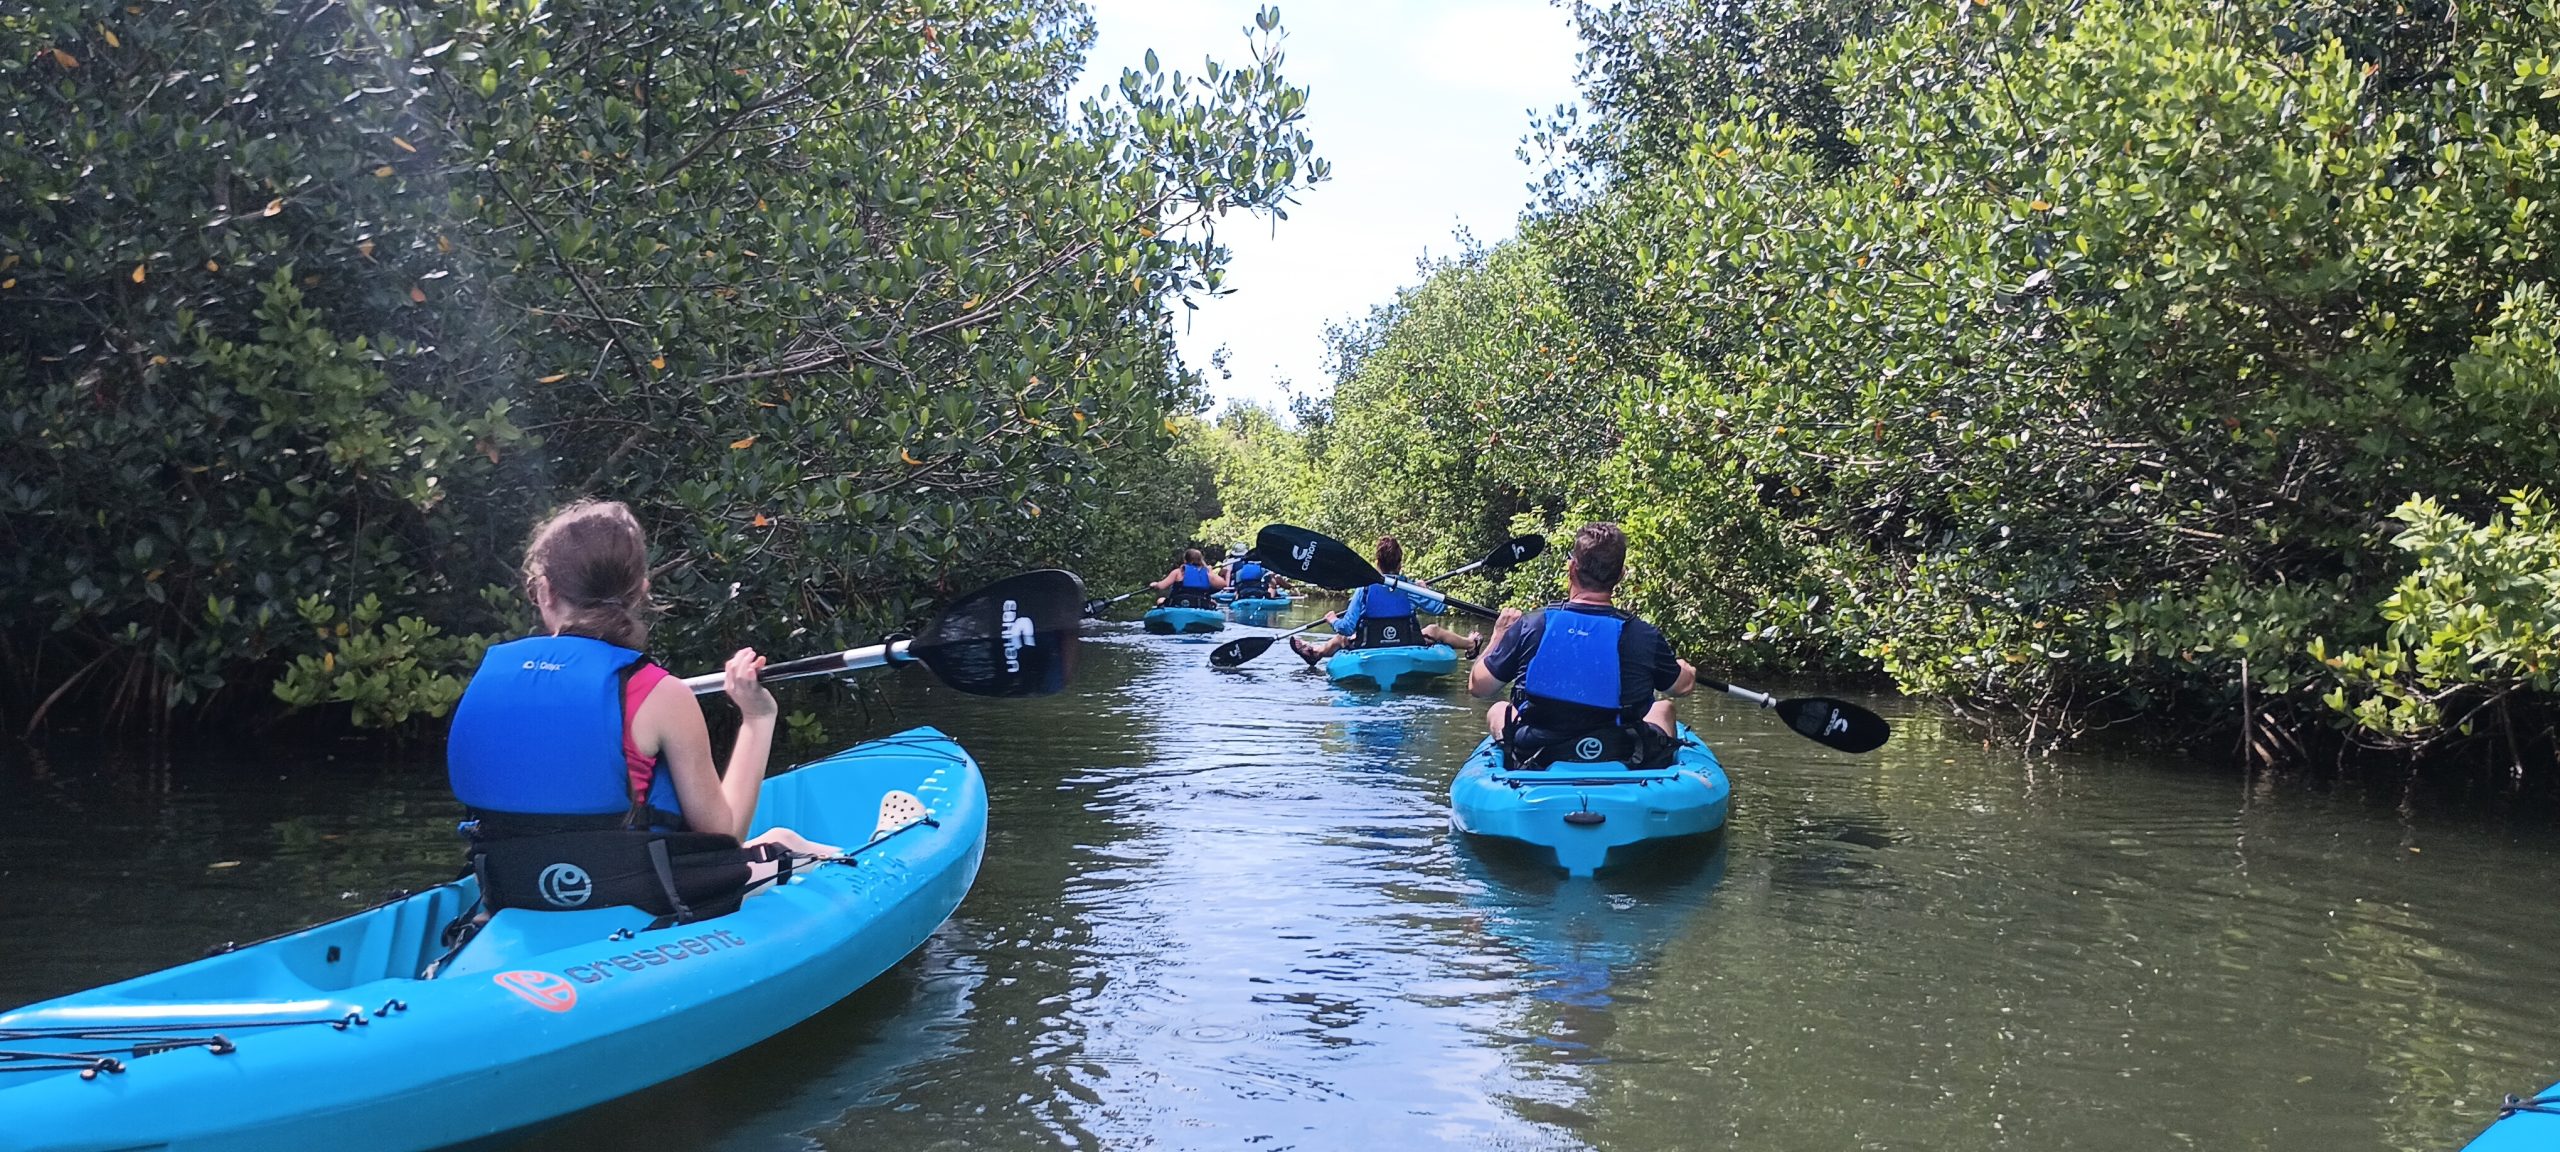 Kayak tour in mangroves of cocoa beach